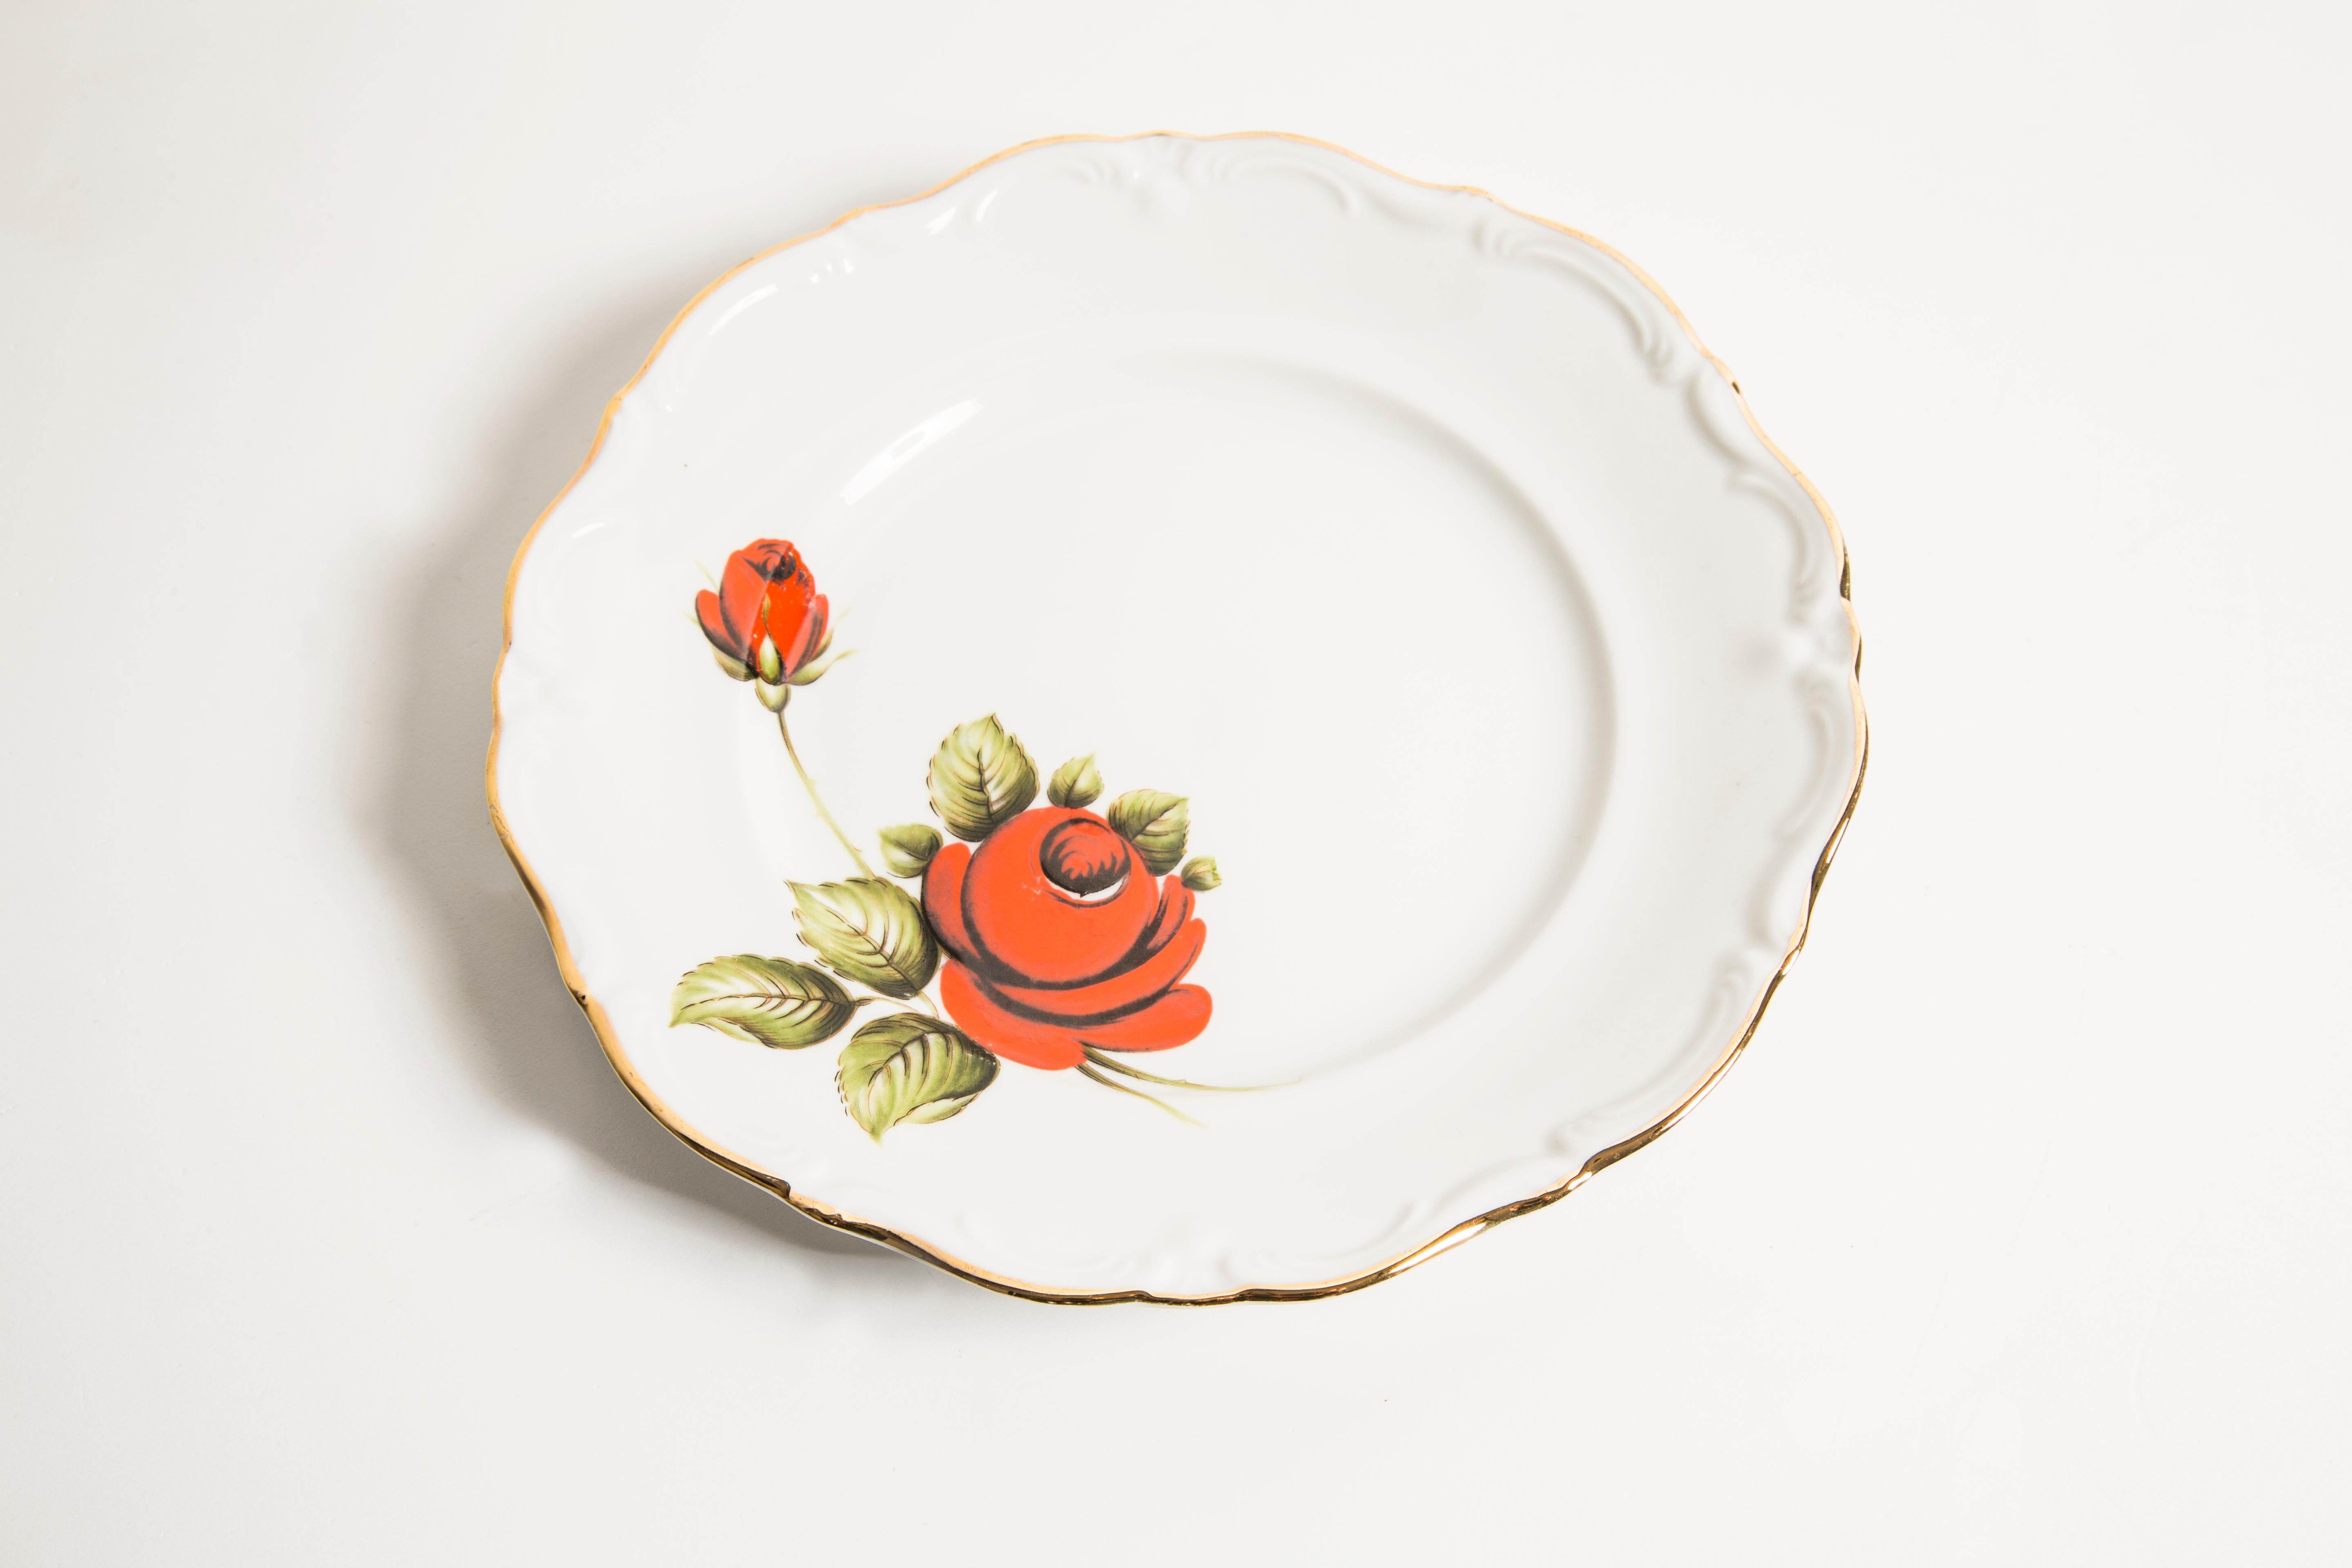 20th Century Midcentury Vintage Rose Decorative Porcelain Plate, Germany, 1970s For Sale